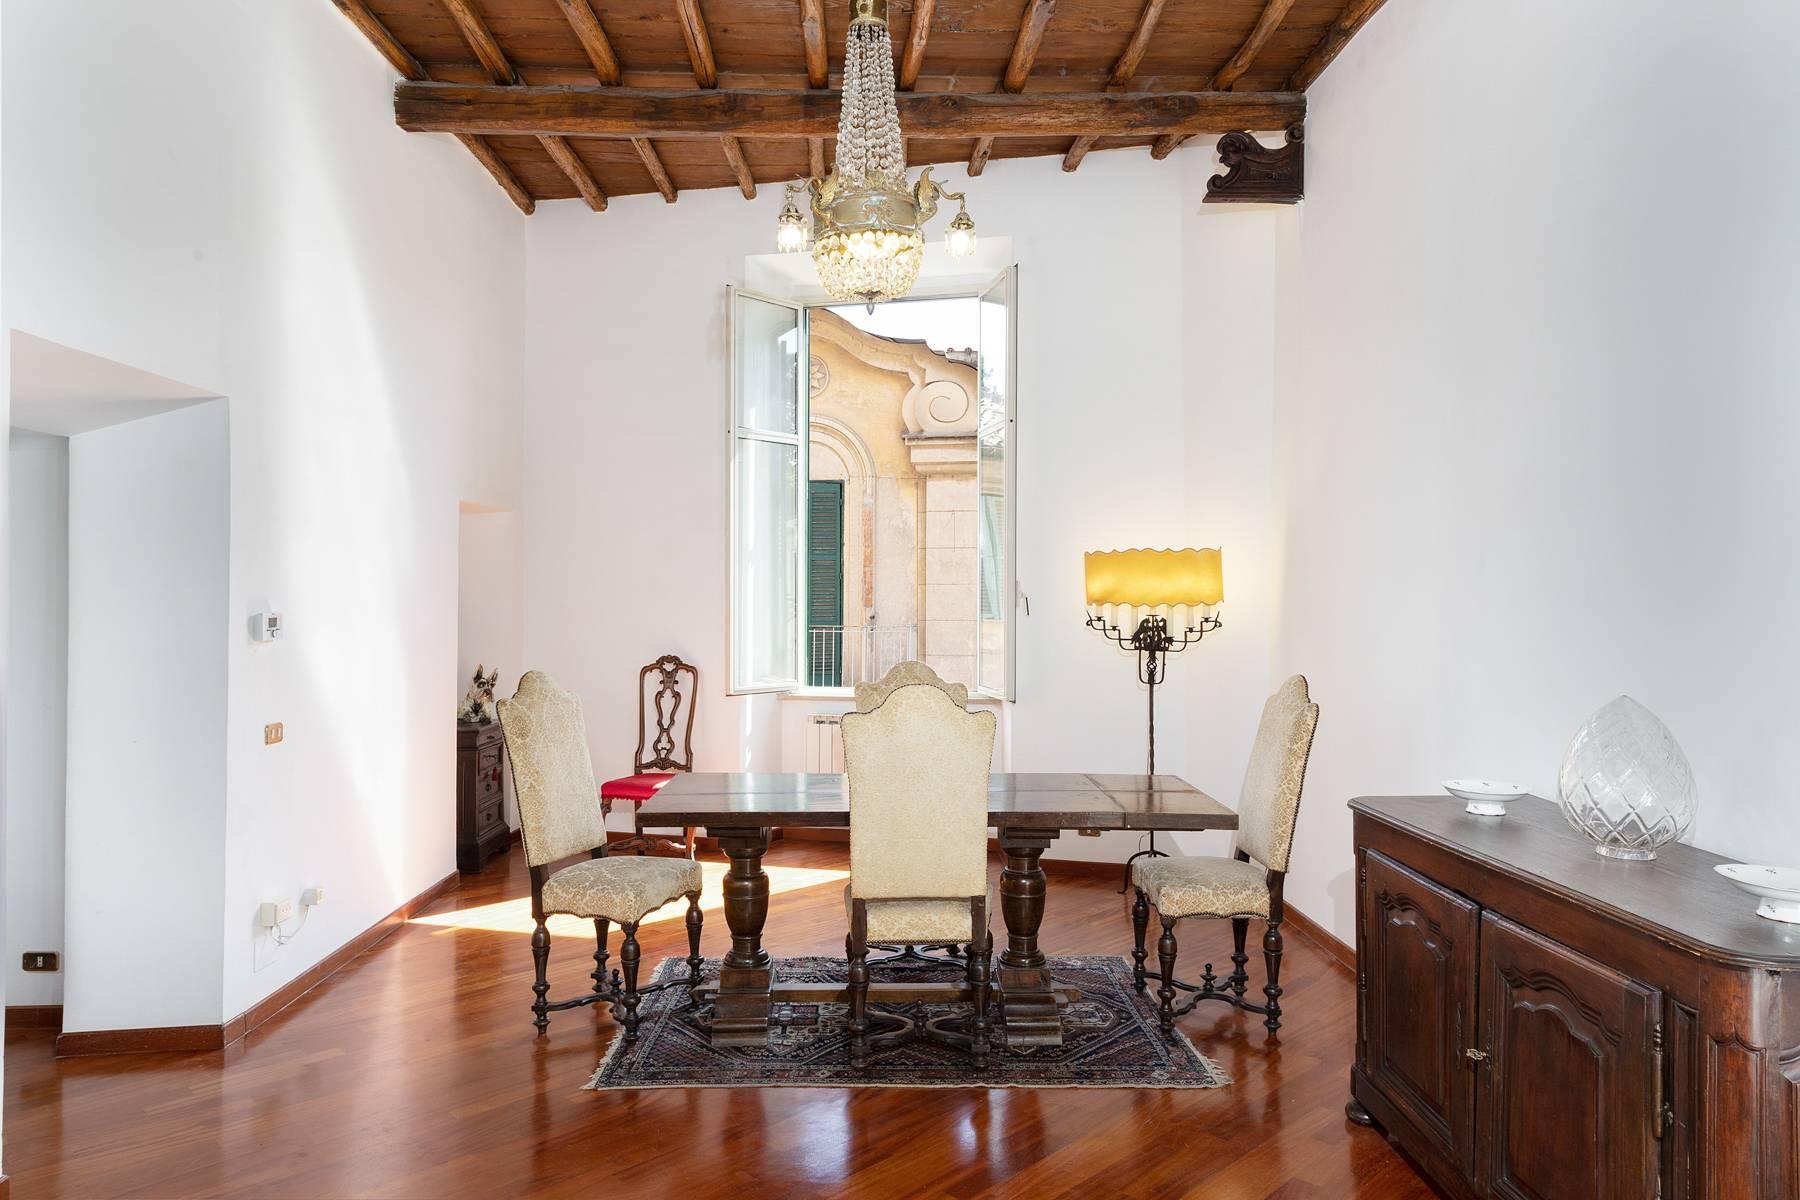 Stunning views for this bright flat close to the Colosseum - 1